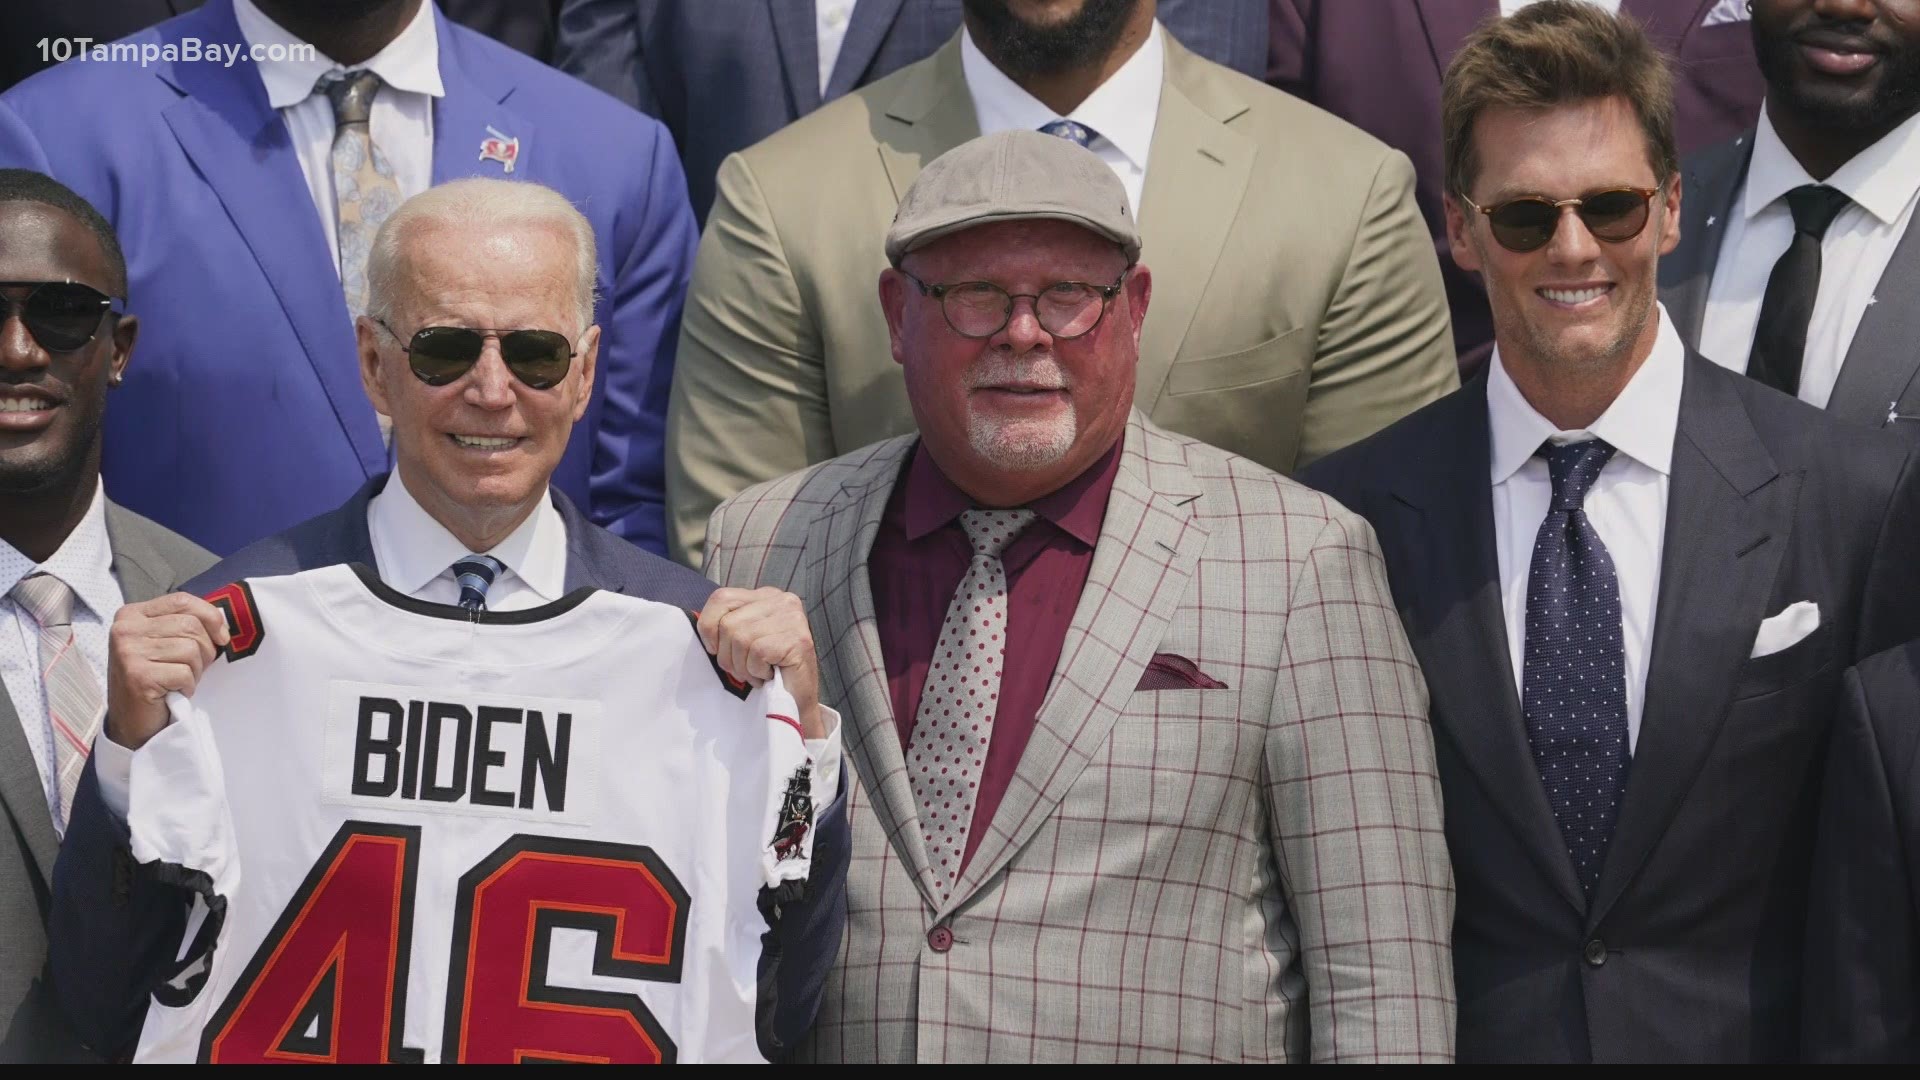 President Joe Biden honored the team Tuesday during a ceremony full of jokes, memories and calls to action.